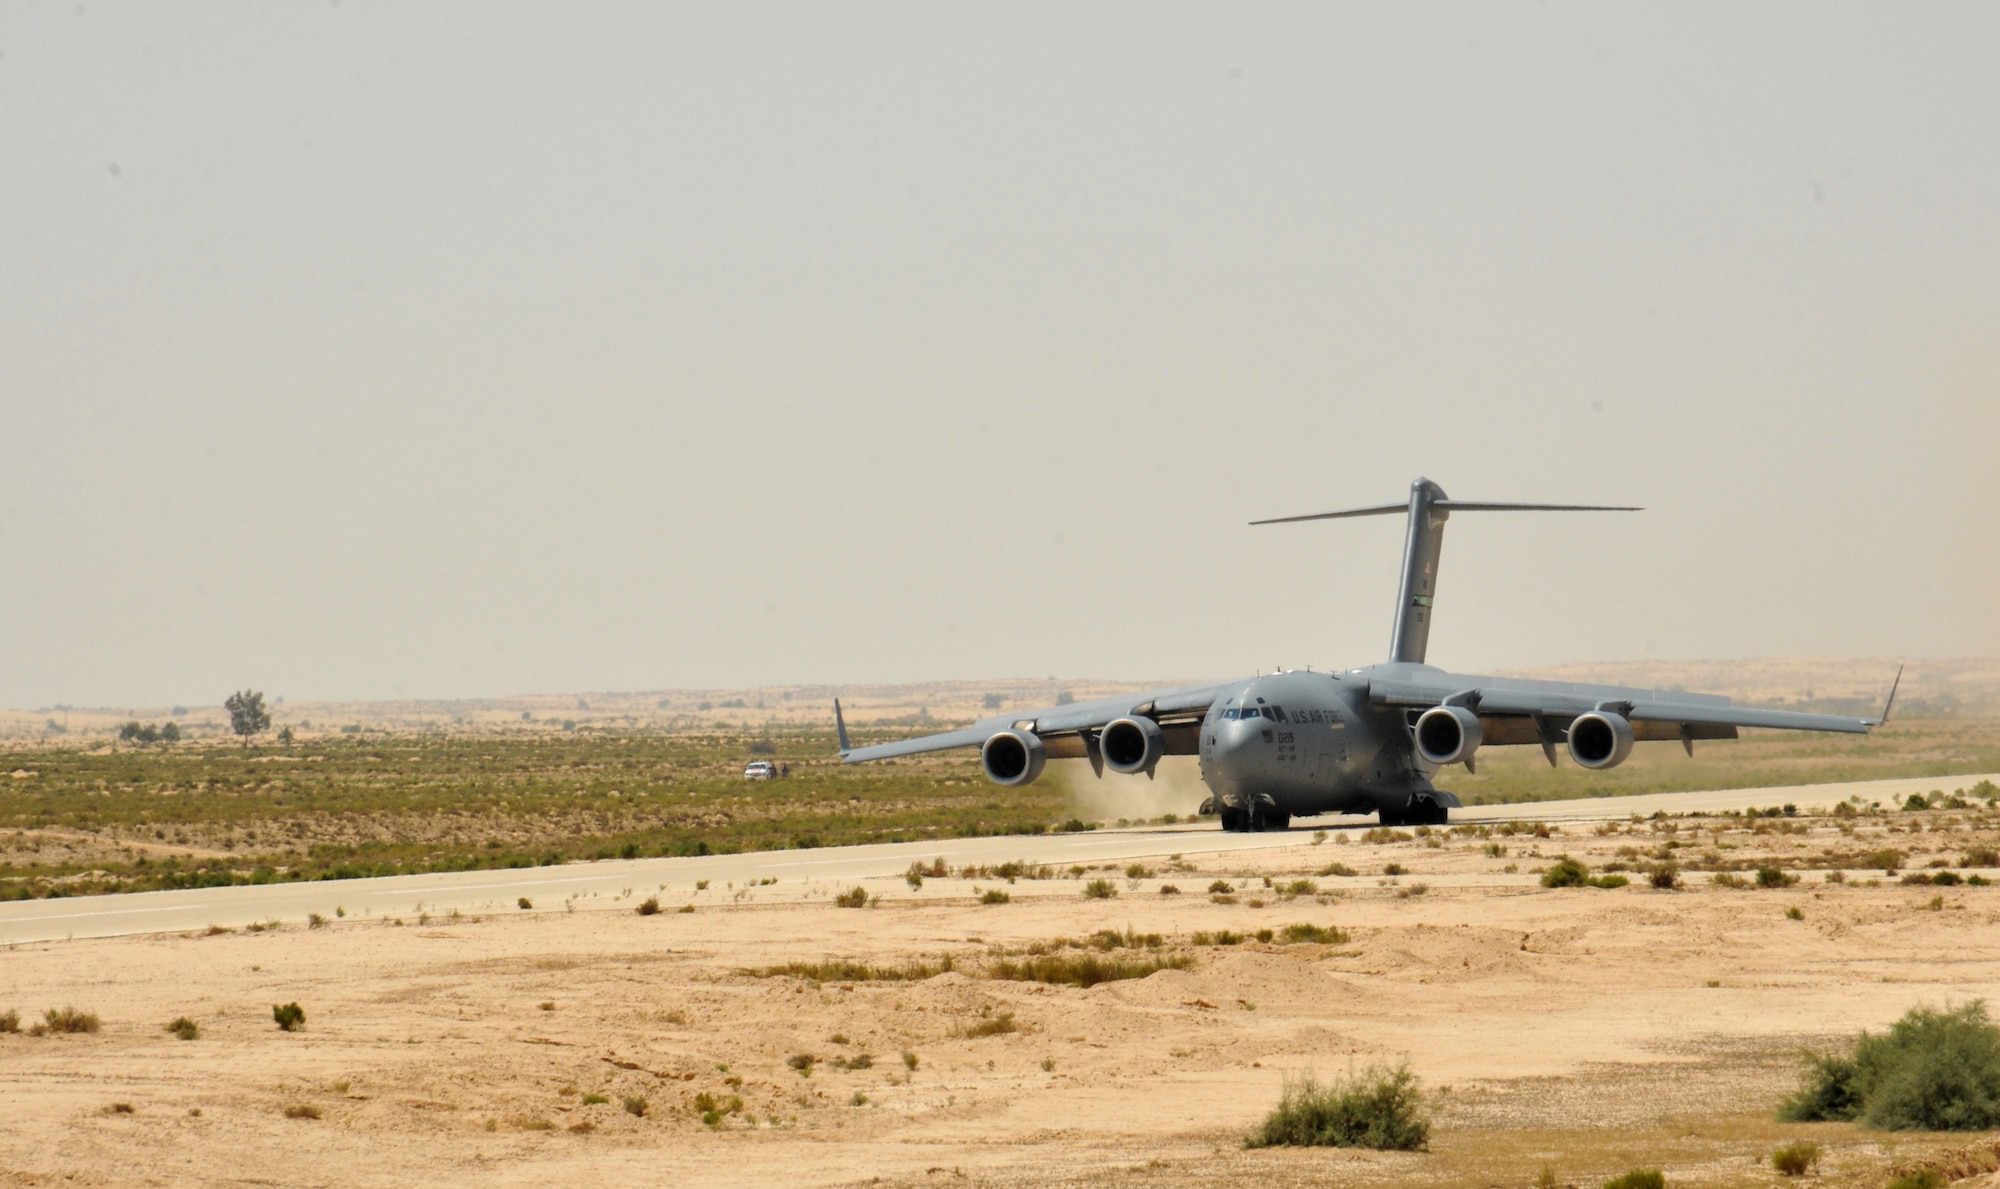 An Air Force C17 Globemaster III lands on an old airstrip  Aug. 19, 2014, in the Sinai Peninsula of Egypt. the airstrip is now used by the Multinational Force and Observers stationed in Sinai, Egypt. The Airmen landed in the Sinai to help provide airlift support of a UH-60 Black Hawk to Soldiers from the Aviation Company, 1st Support Battalion, Task force Sinai. The Blackhawk was loaded into the belly of the C-17 Globemaster and transported to Germany where it will undergo advanced maintenance. The C-17 is from the 62nd Airlift Wing, based out of Joint Base Lewis-McChord, Wash. (U.S. Army Photo/Sgt. Thomas Duval)